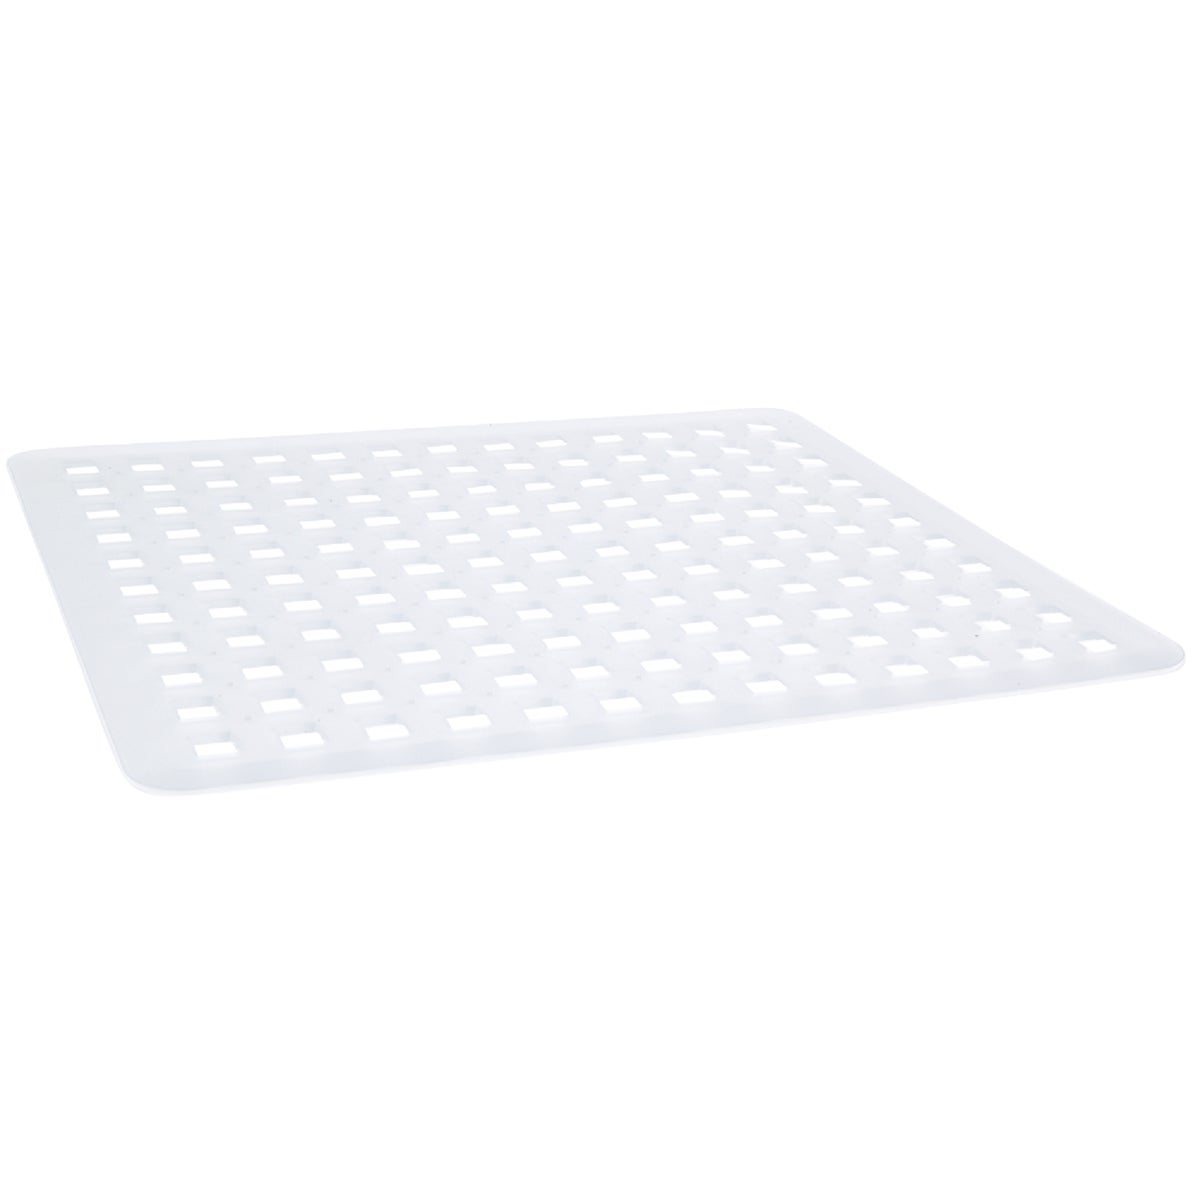 Item 606022, InterDesigns Euro Sink Mat is stain-resistant making it ideal for any sink